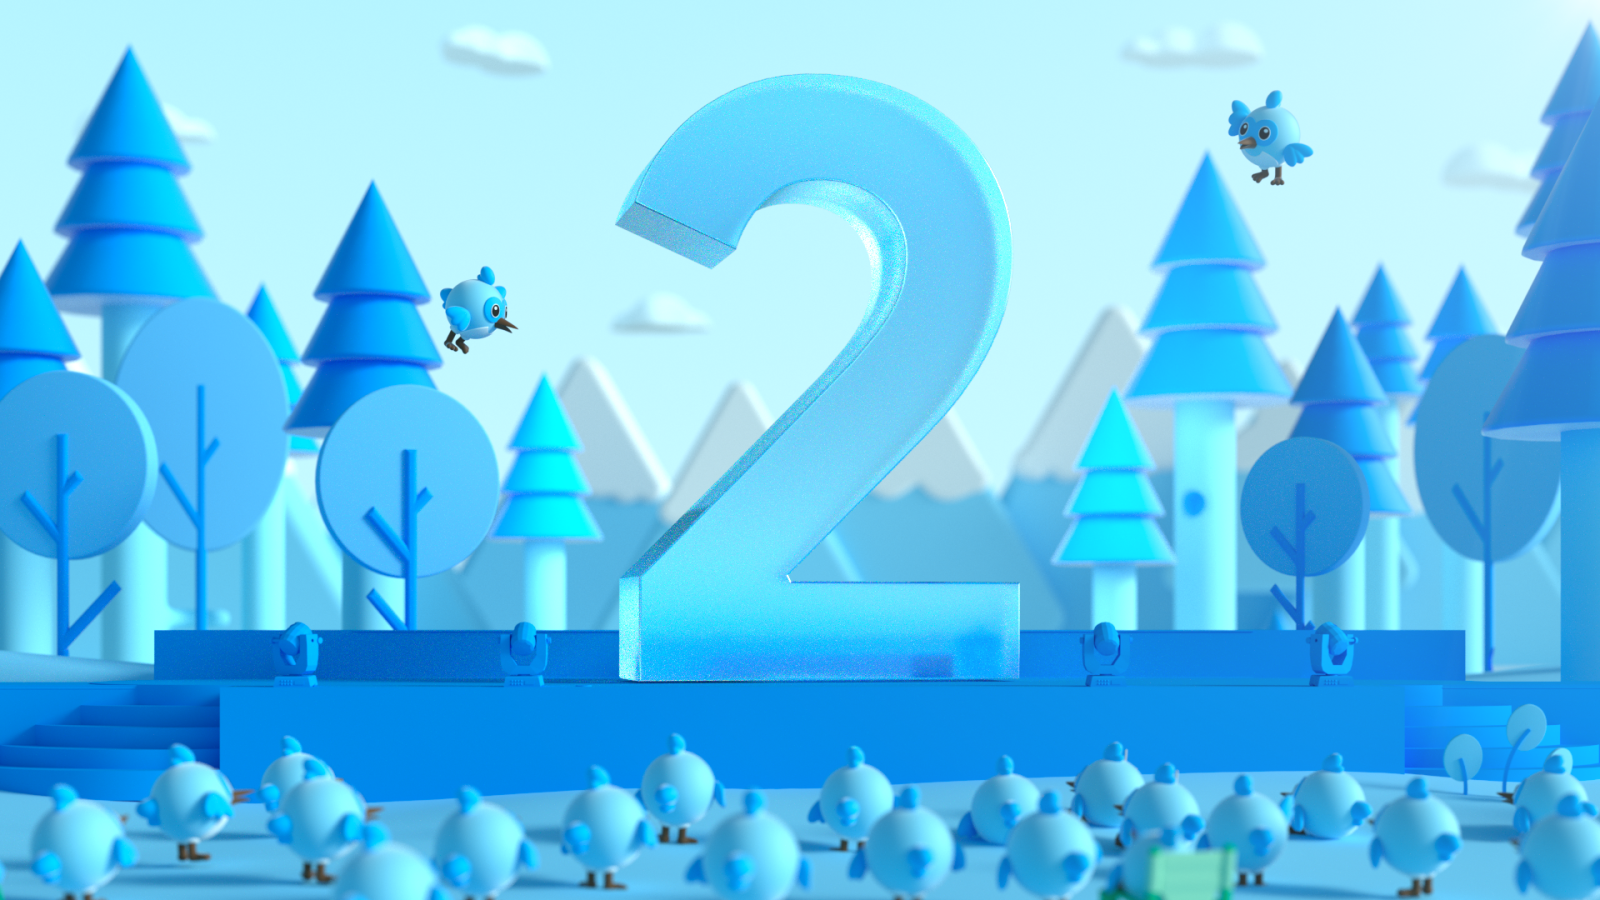 A large "2" in an all-blue forest, surrounded by flying Flutter Dash mascots